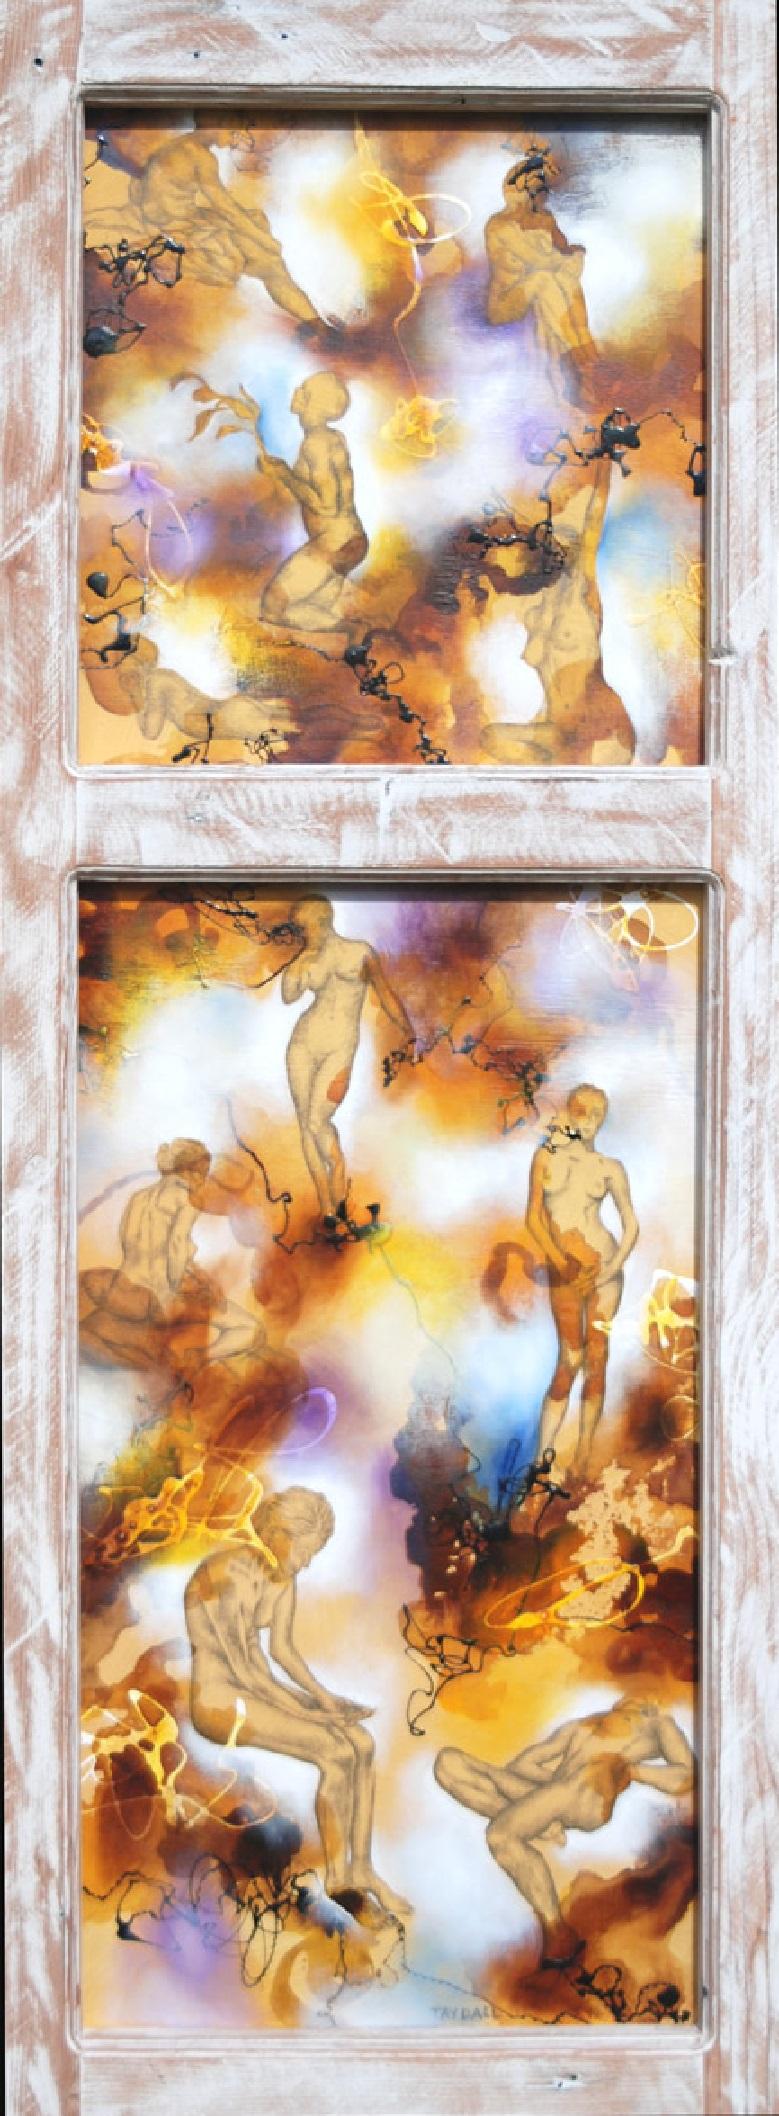 Surreal Nude Oil Painting with Wooden Frame "New Man Alone 2"